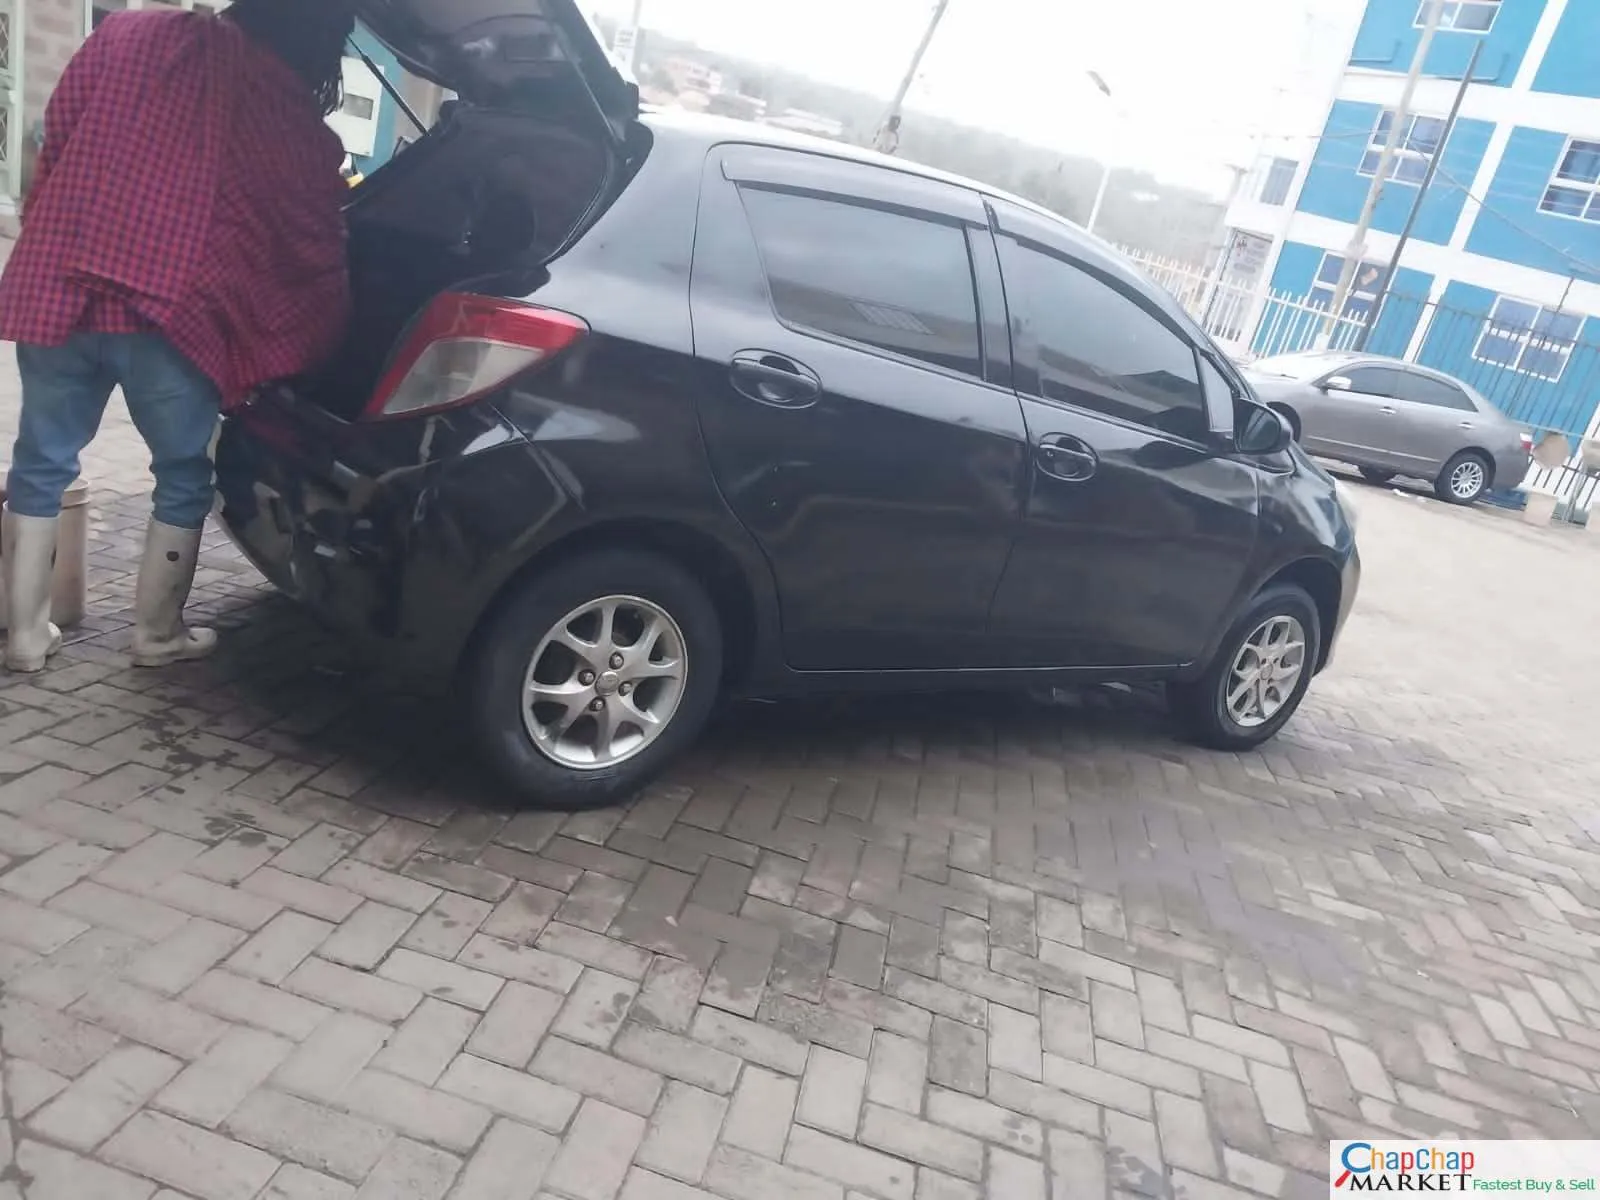 [Sub-categories]-Toyota Vitz for sale in Kenya 2012 440k Only You Pay 30% Deposit Trade in OK EXCLUSIVE 6